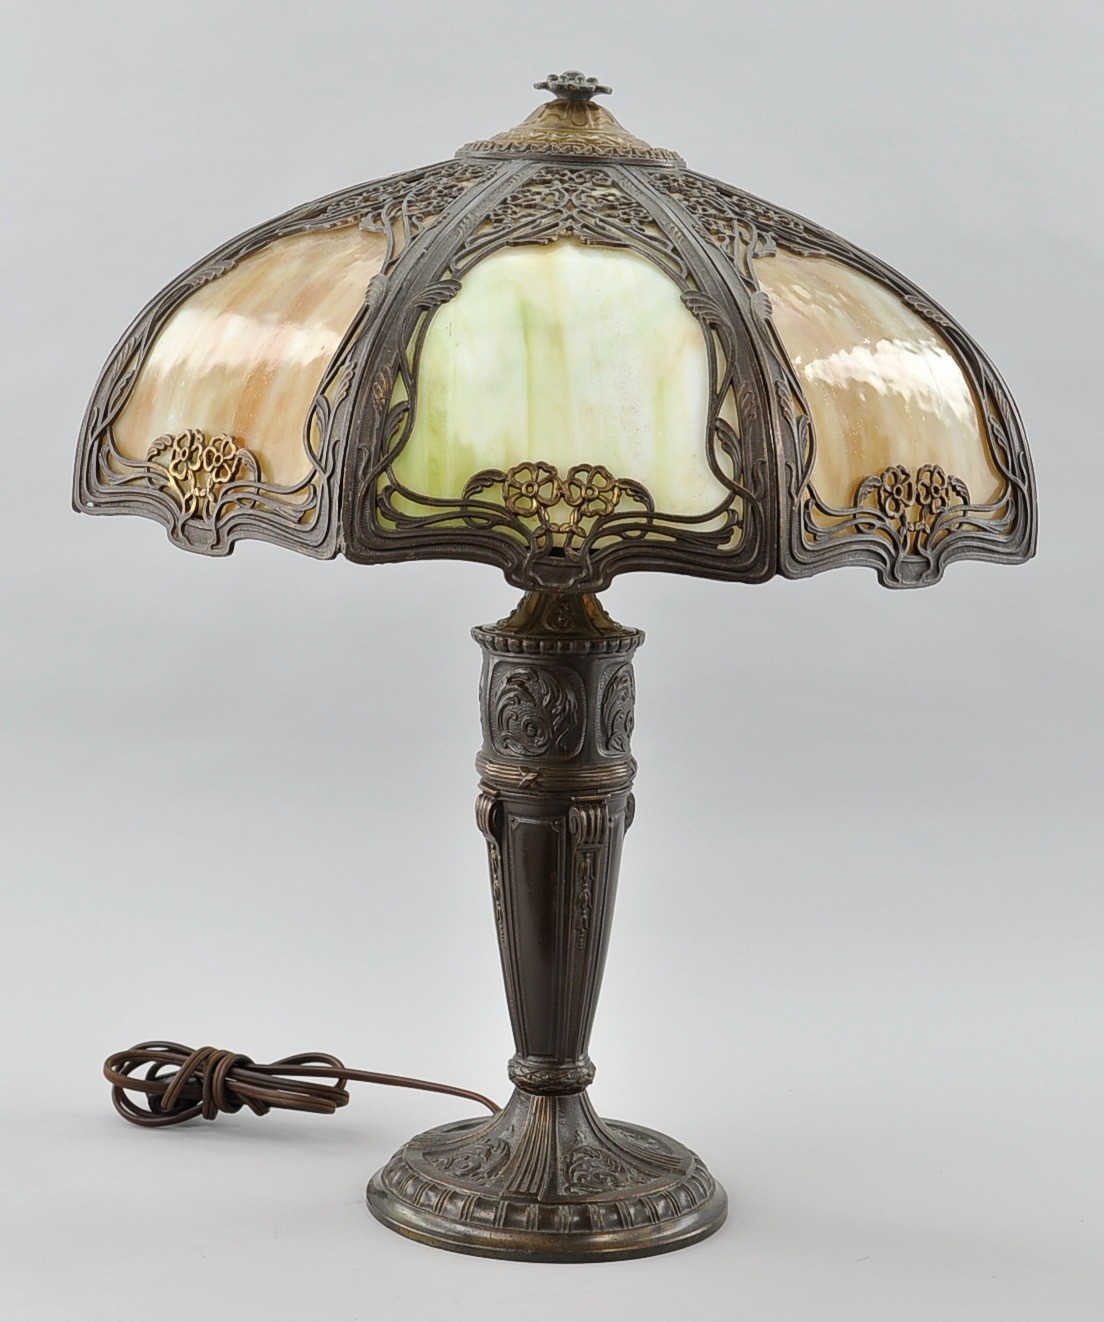 An antique slag glass lamp and shade 03 04 10